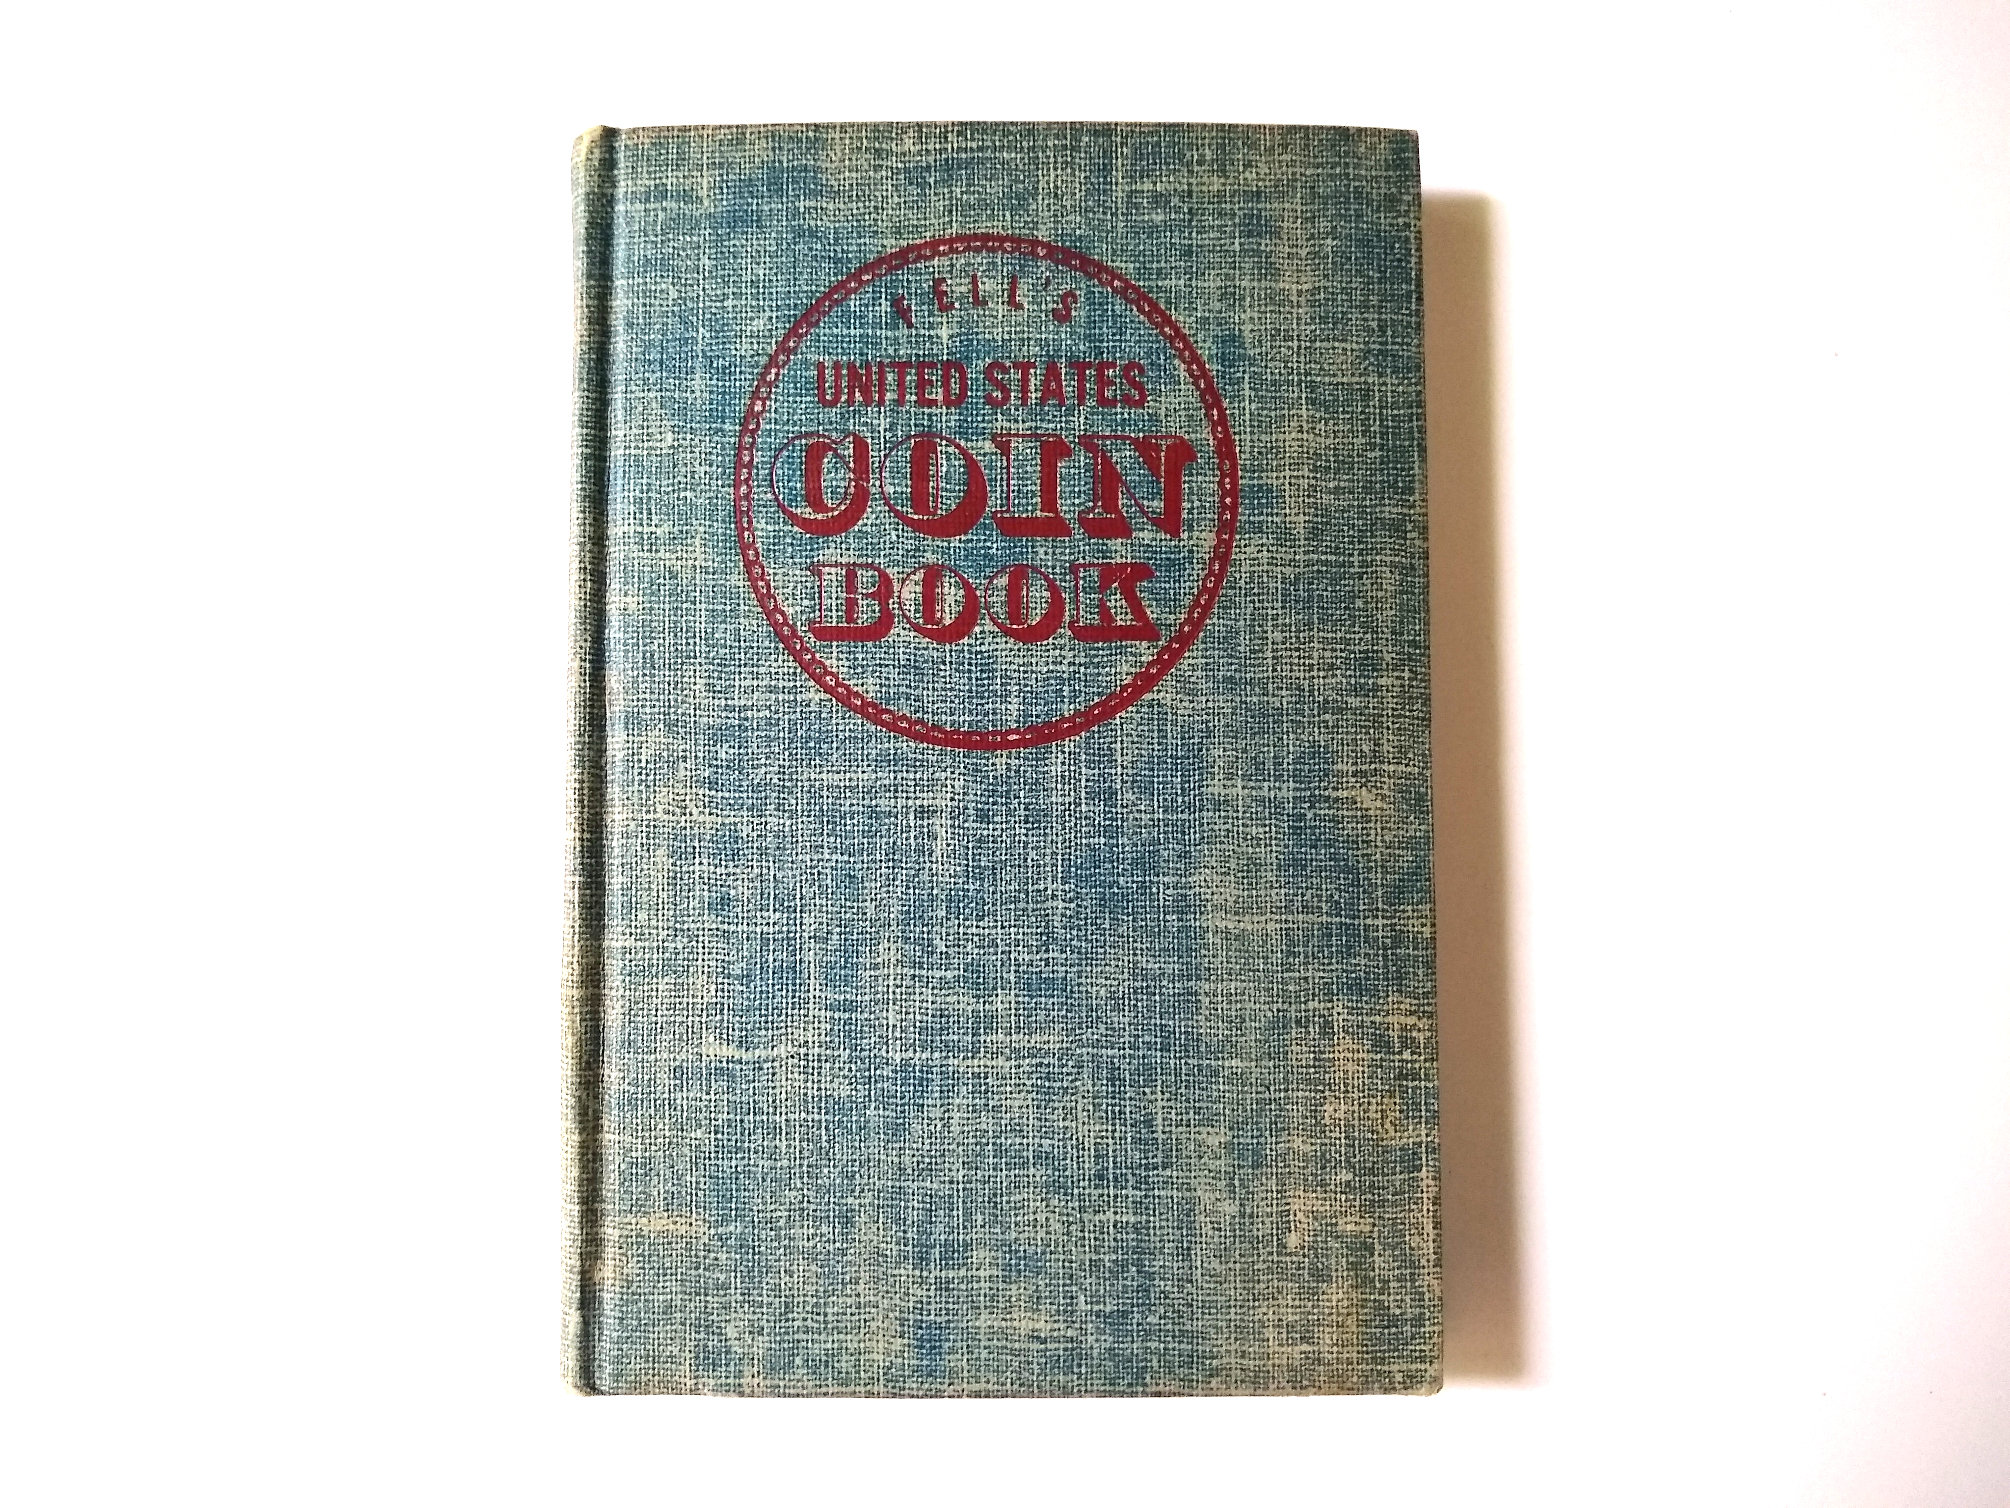 1952 Fell's United States Coin Book New Revised Edition Hardcover by  Jacques Del Monte, Great Condition, Vintage Coin Collector Publication 